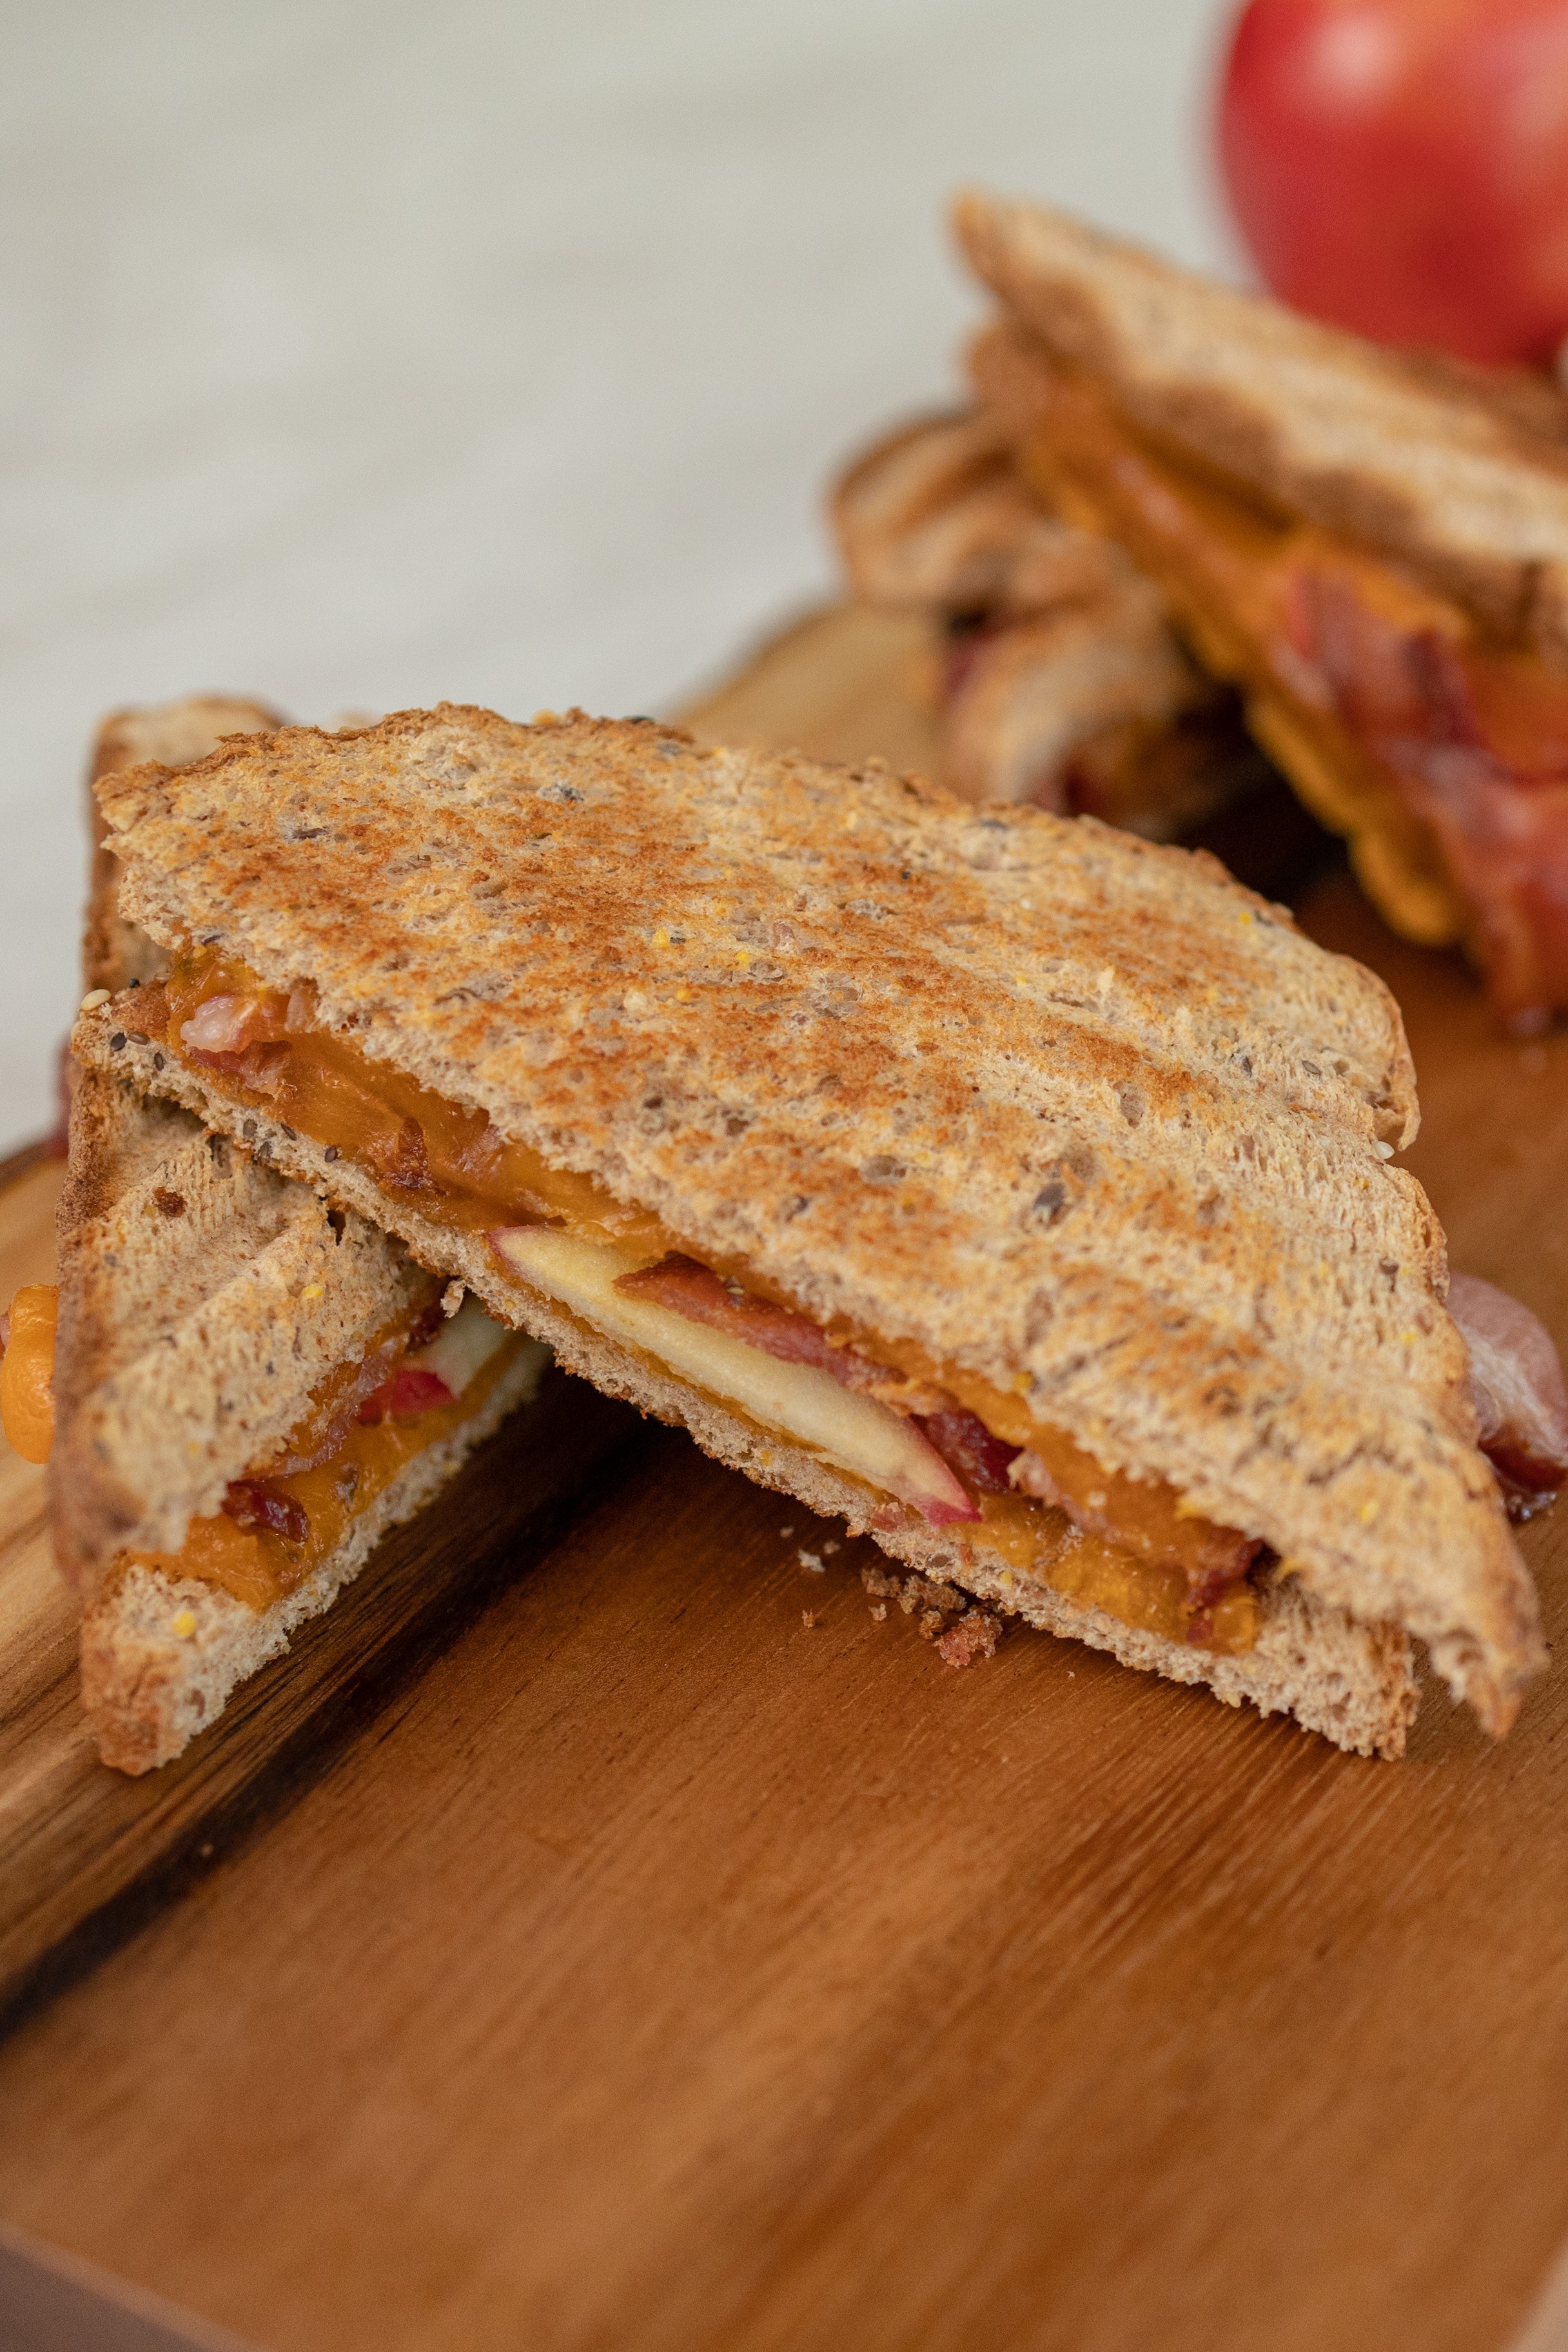 Apple & Bacon Grilled Cheese